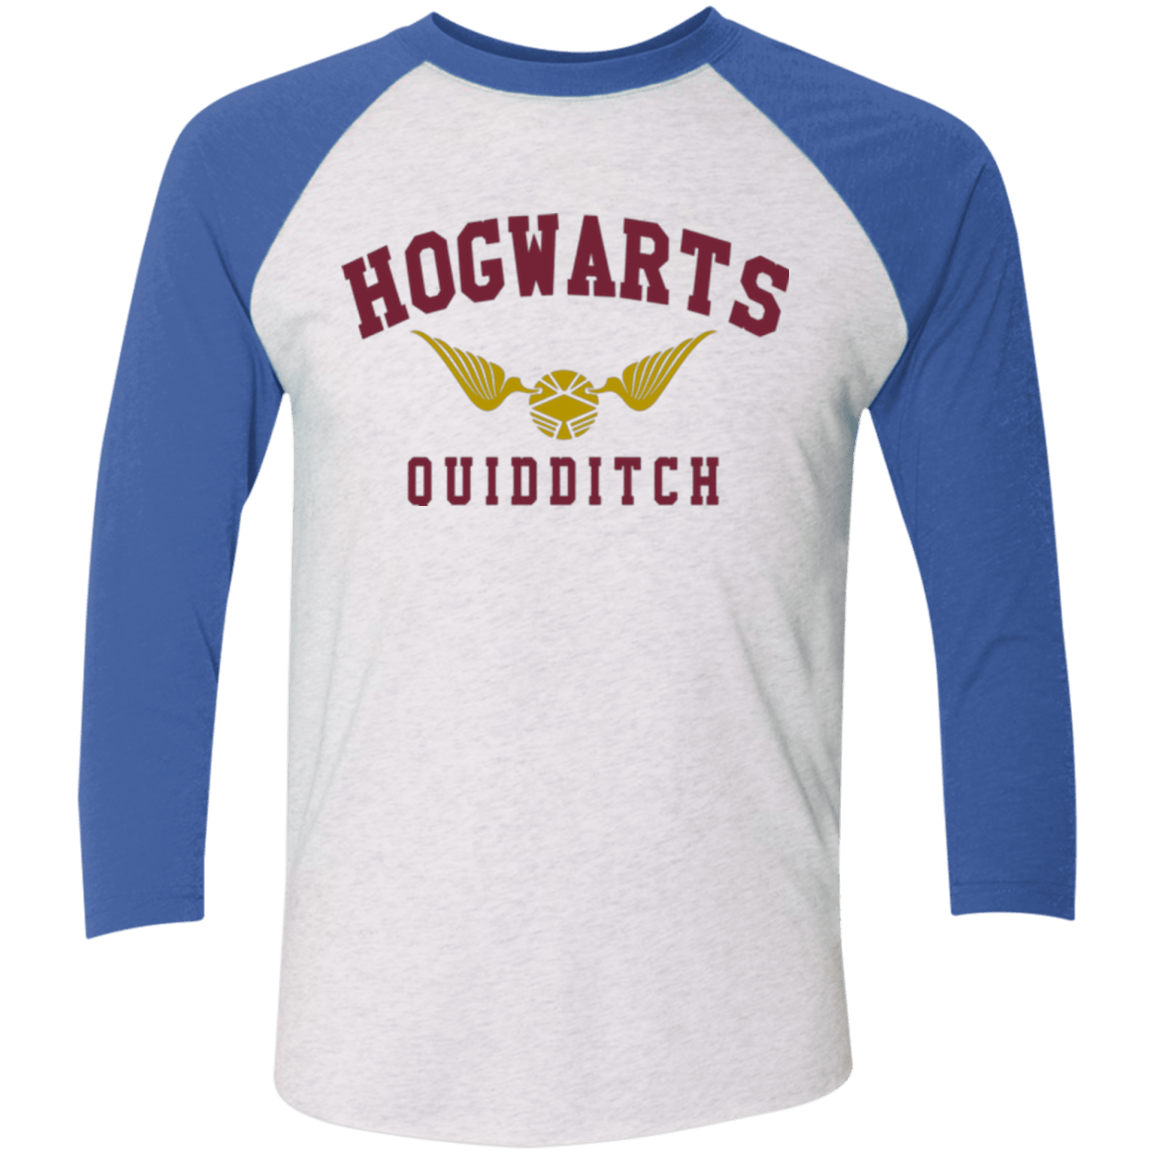 T-Shirts Heather White/Vintage Royal / X-Small Hogwarts Quidditch Triblend 3/4 Sleeve